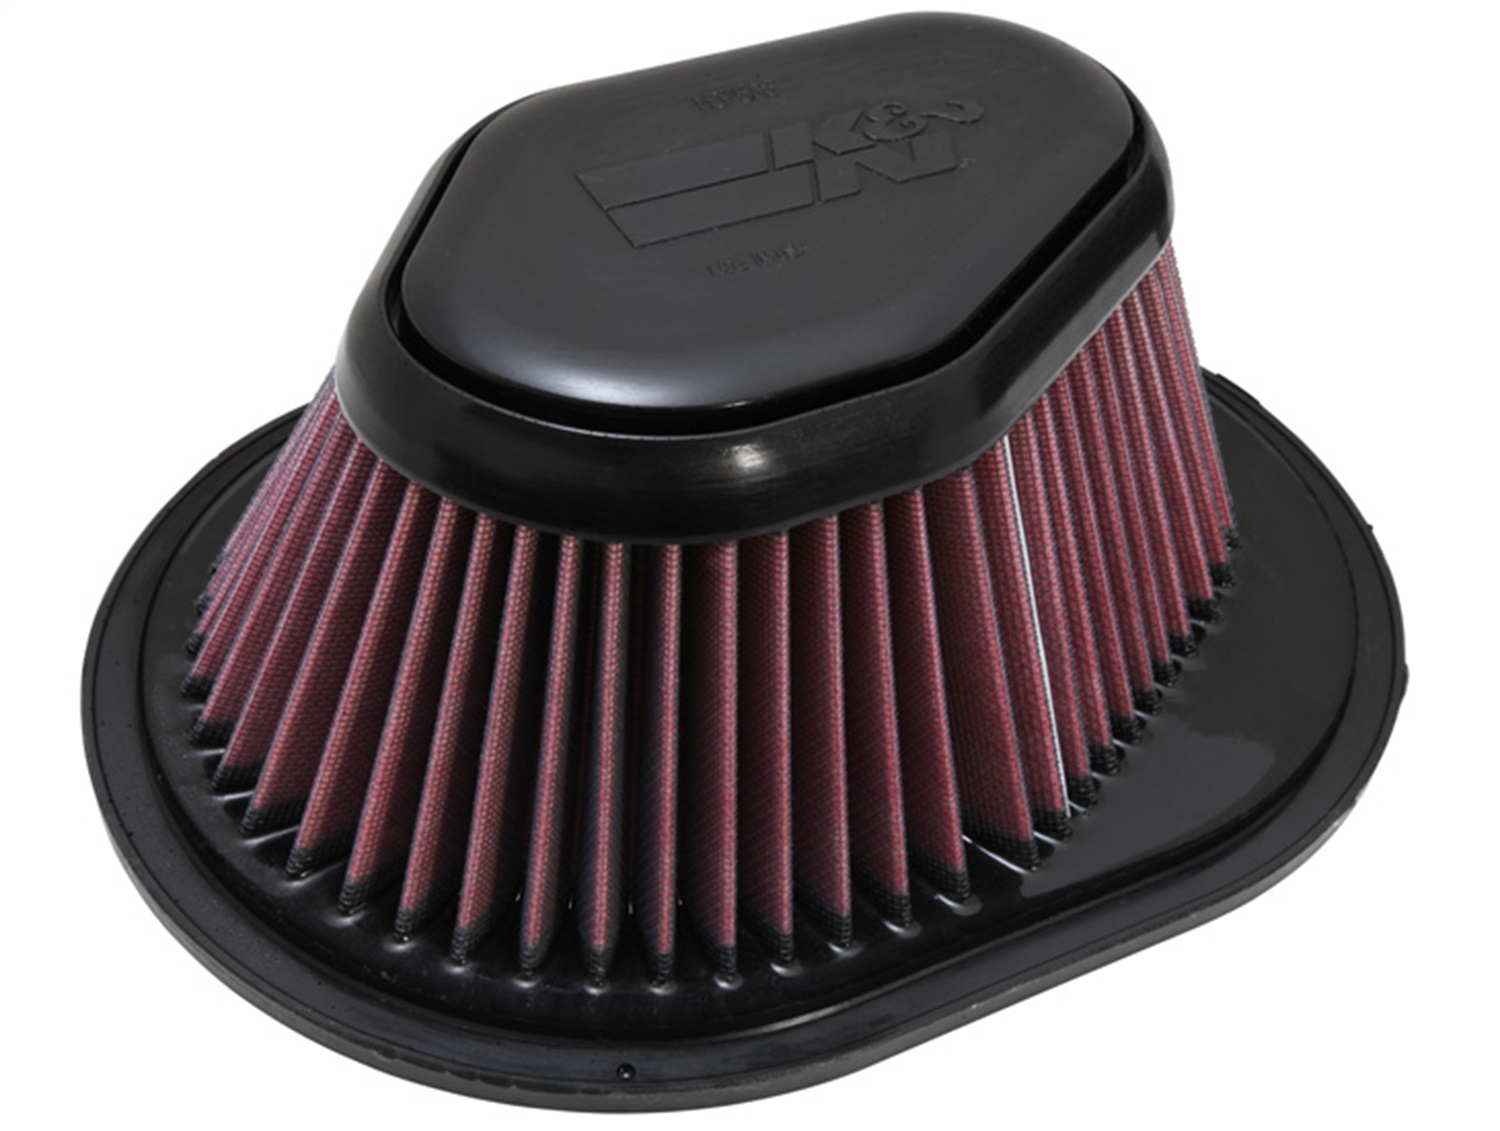 K&N Filters K&N Filters E-1995 Air Filter Fits 06-09 STS